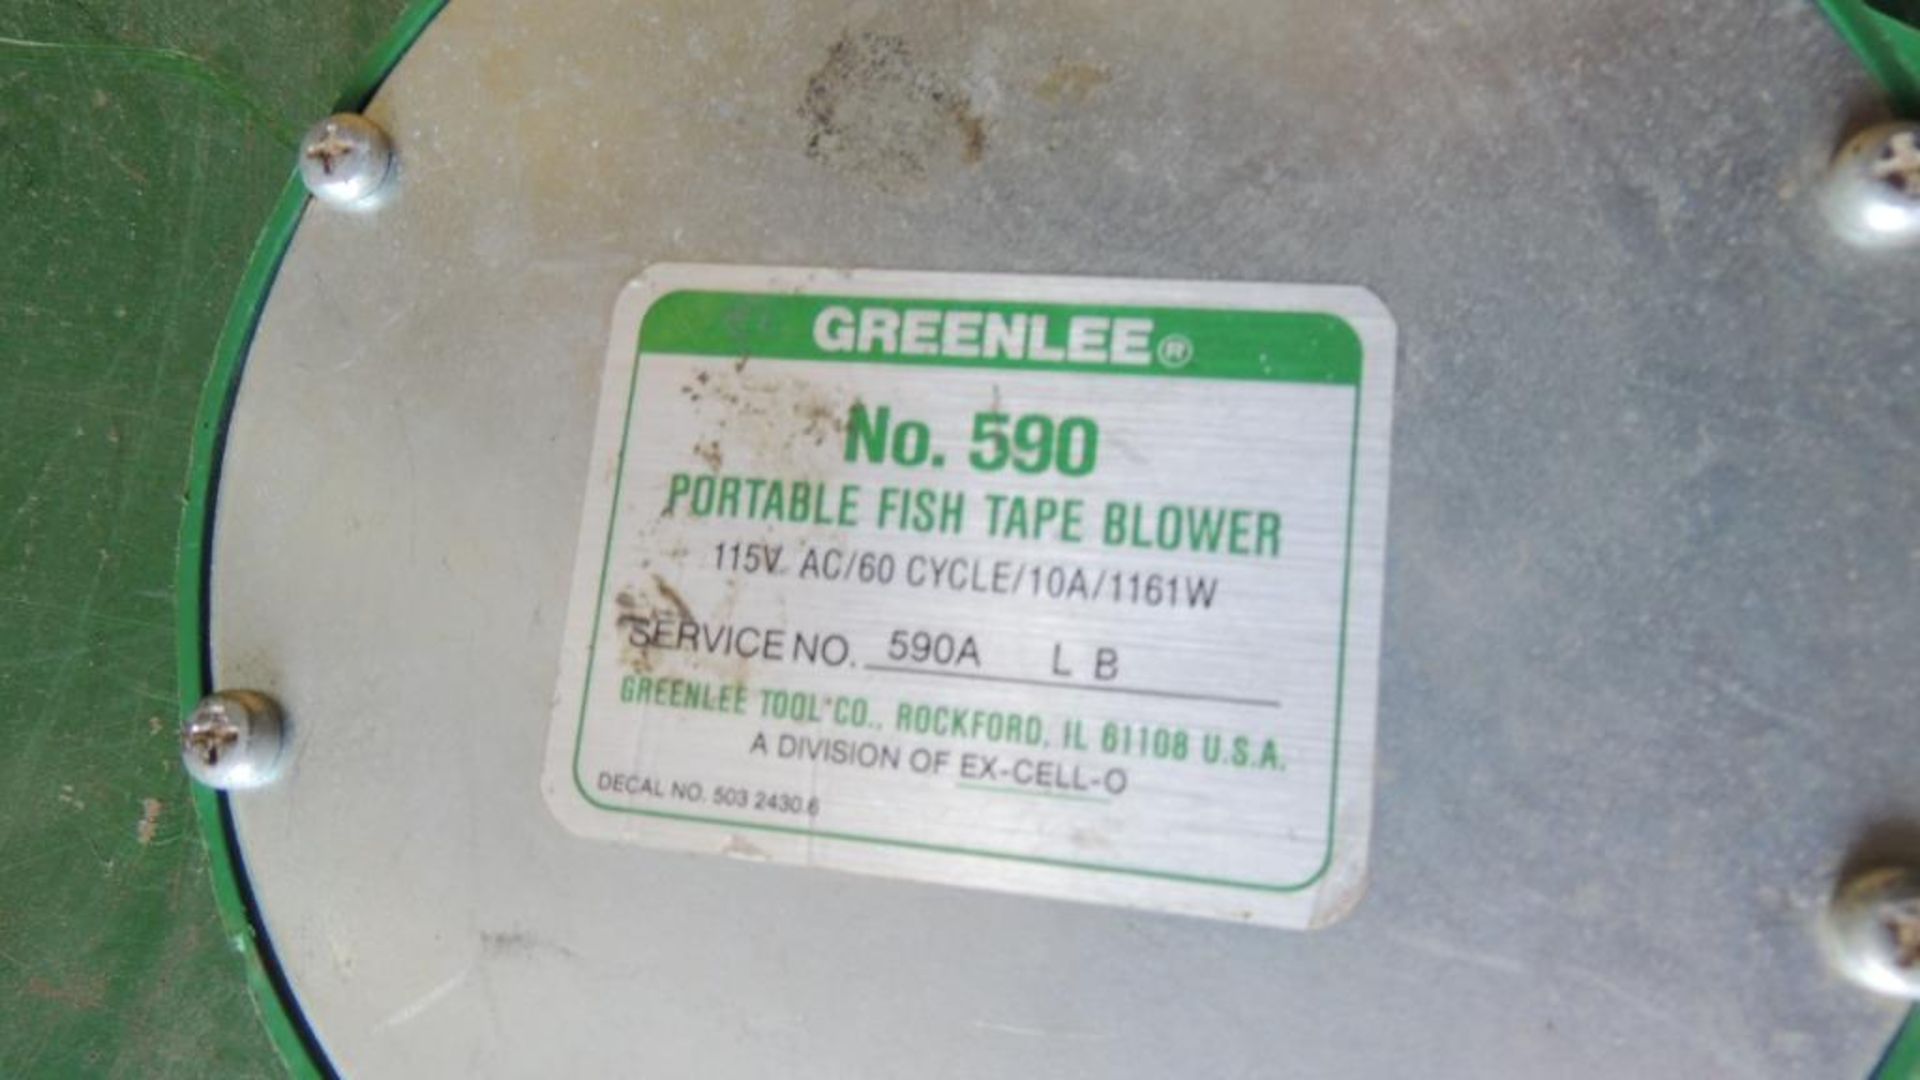 Greenlee 777 Bender; 1 1/2" to 4" also Greenlee No. 570 portable fish tape blower. HIT# 2226754. - Image 2 of 10